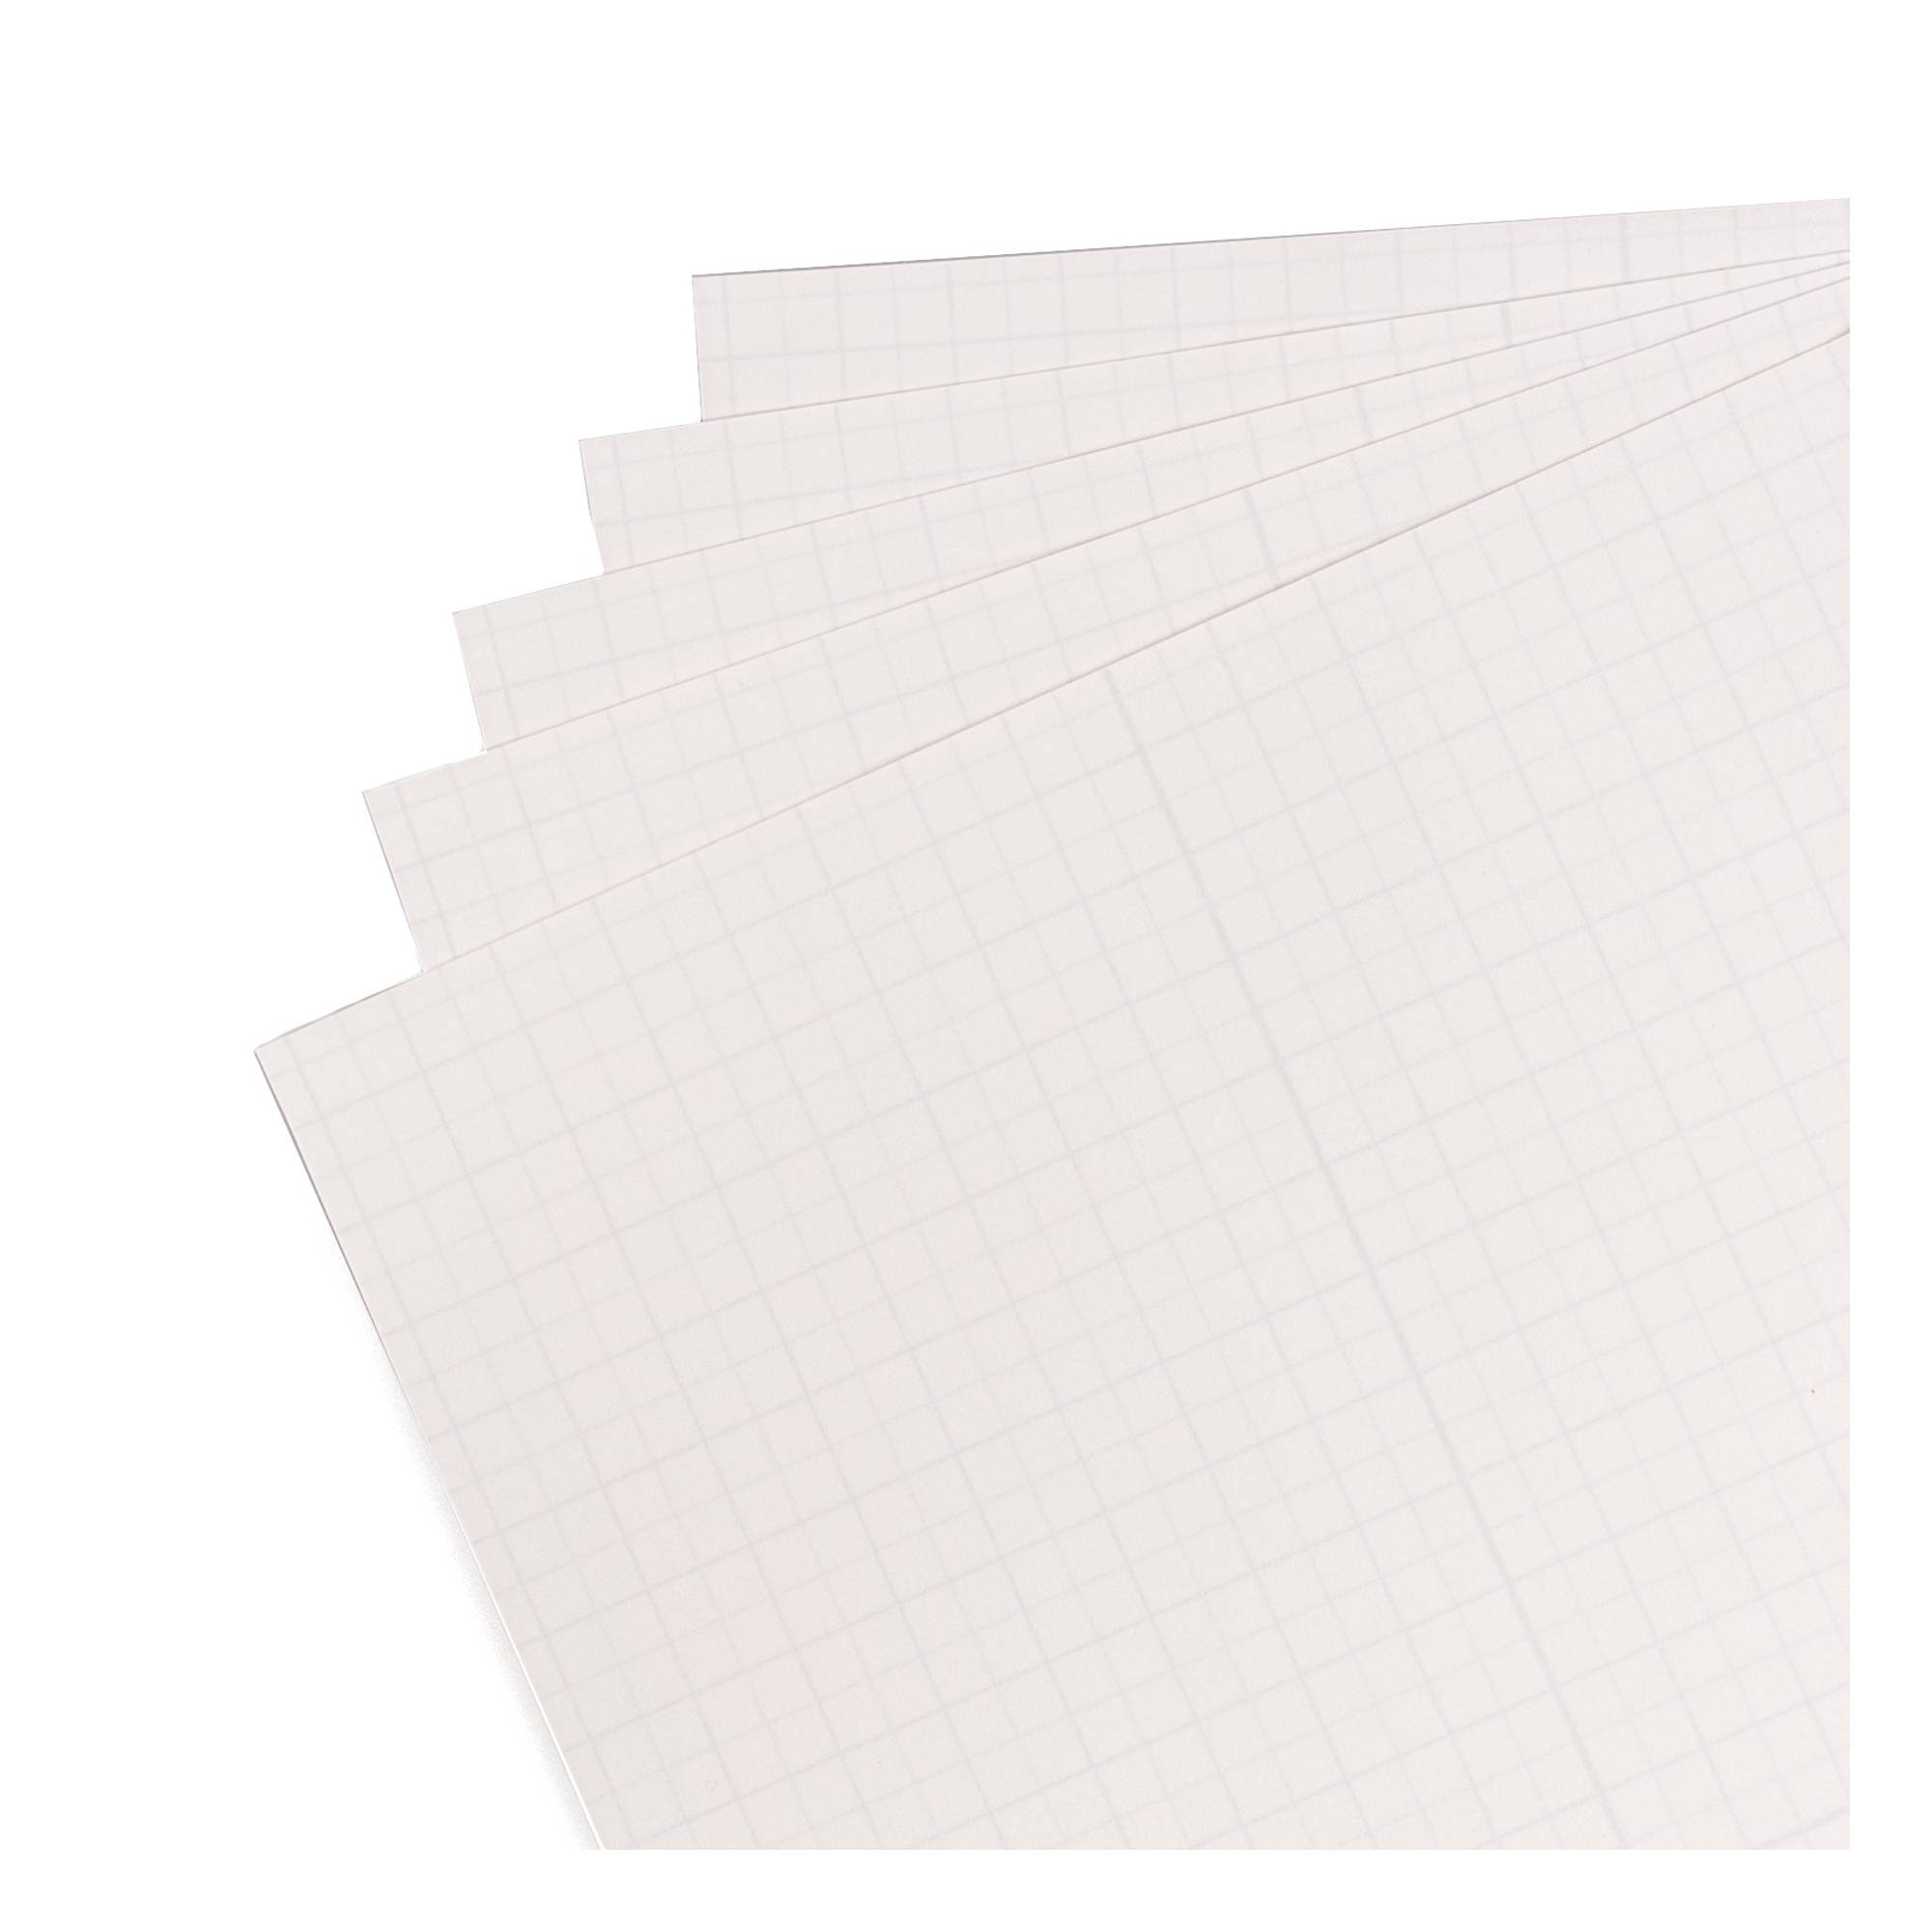 Sizzix Sticky Grid Sheets 5 Pack